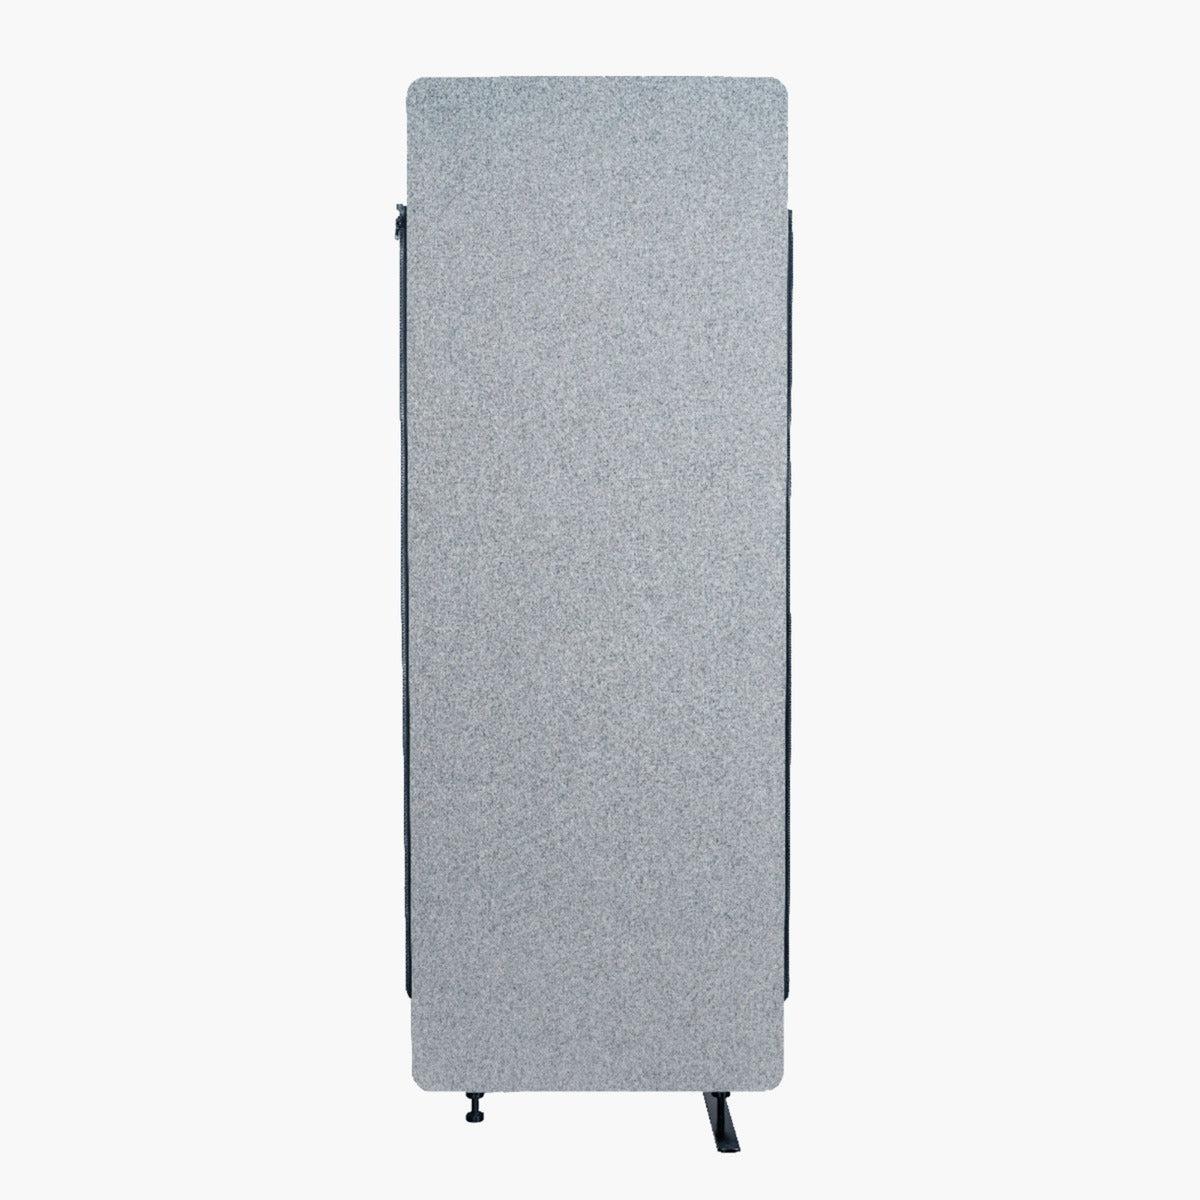 Expansion Panel for RECLAIM Acoustic Room Dividers